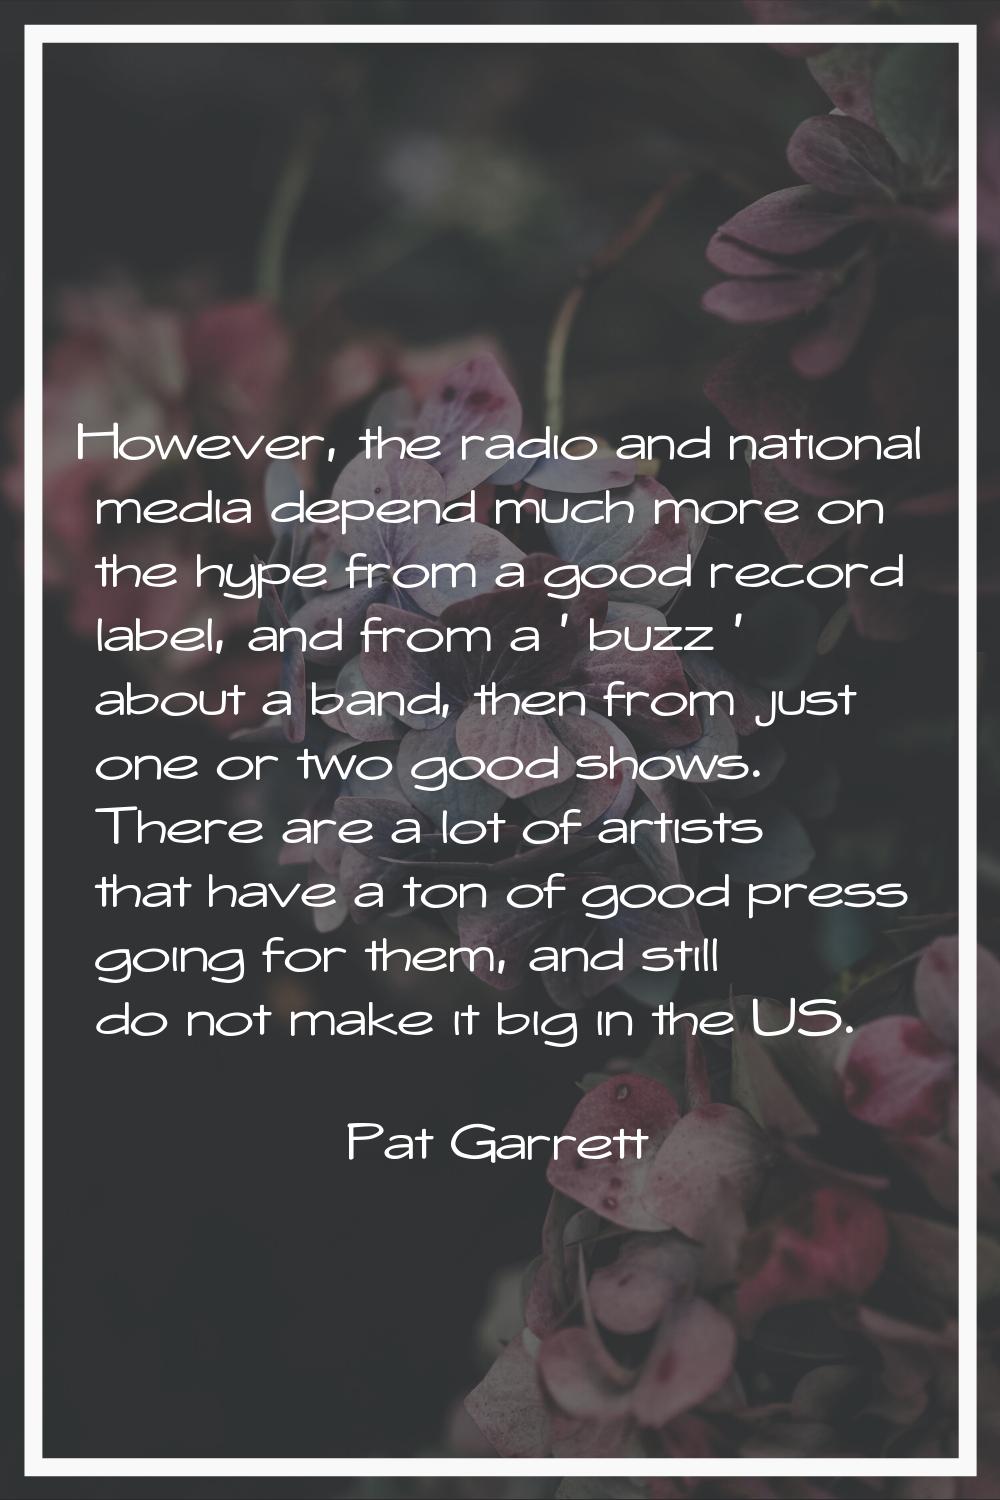 However, the radio and national media depend much more on the hype from a good record label, and fr